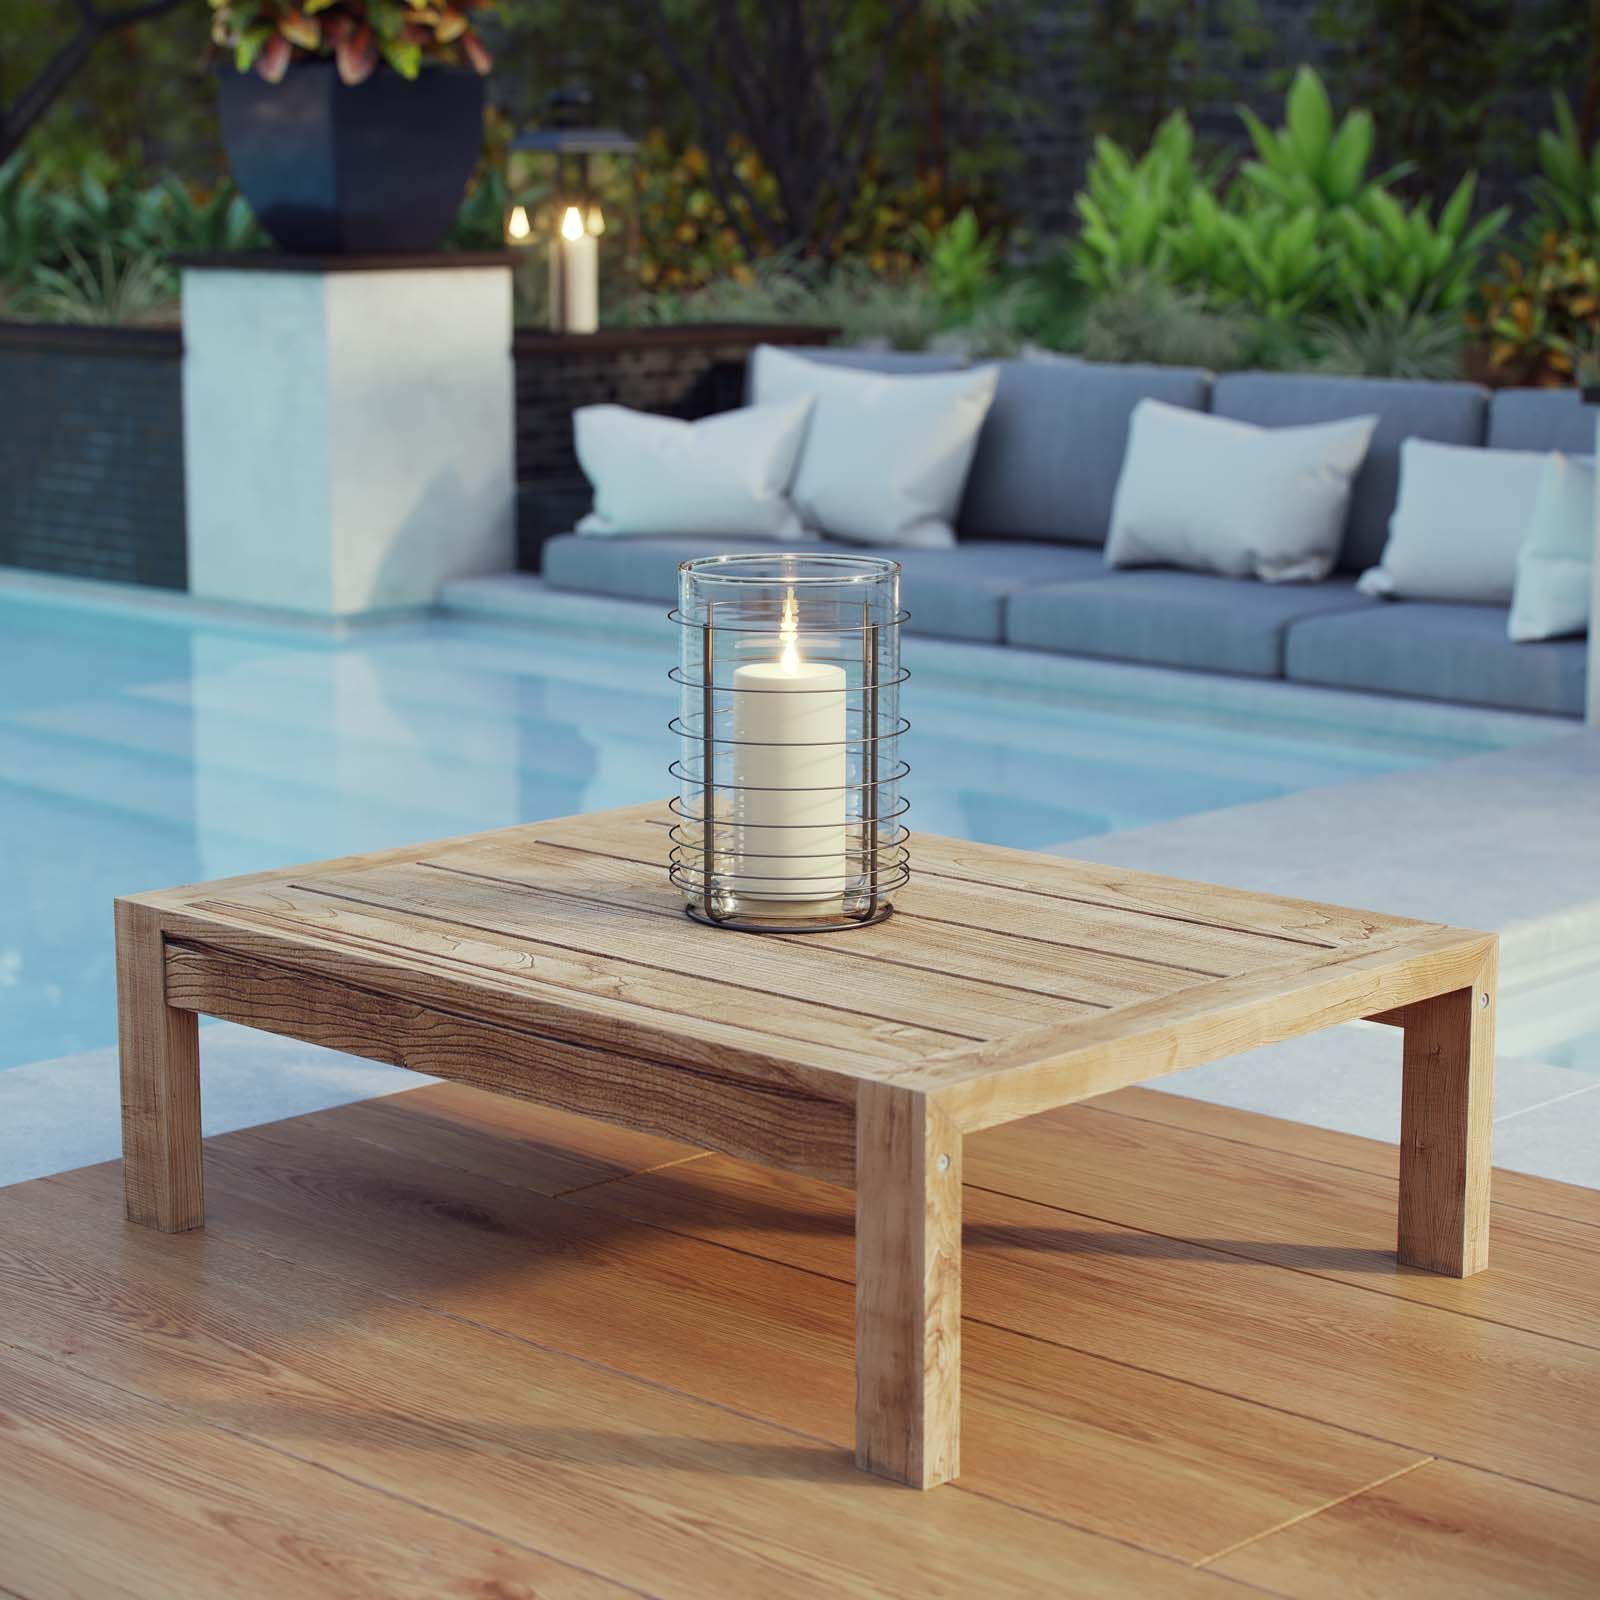 Upland Outdoor Patio Wood Coffee Table Natural In Modern Outdoor Patio Coffee Tables (Gallery 11 of 20)